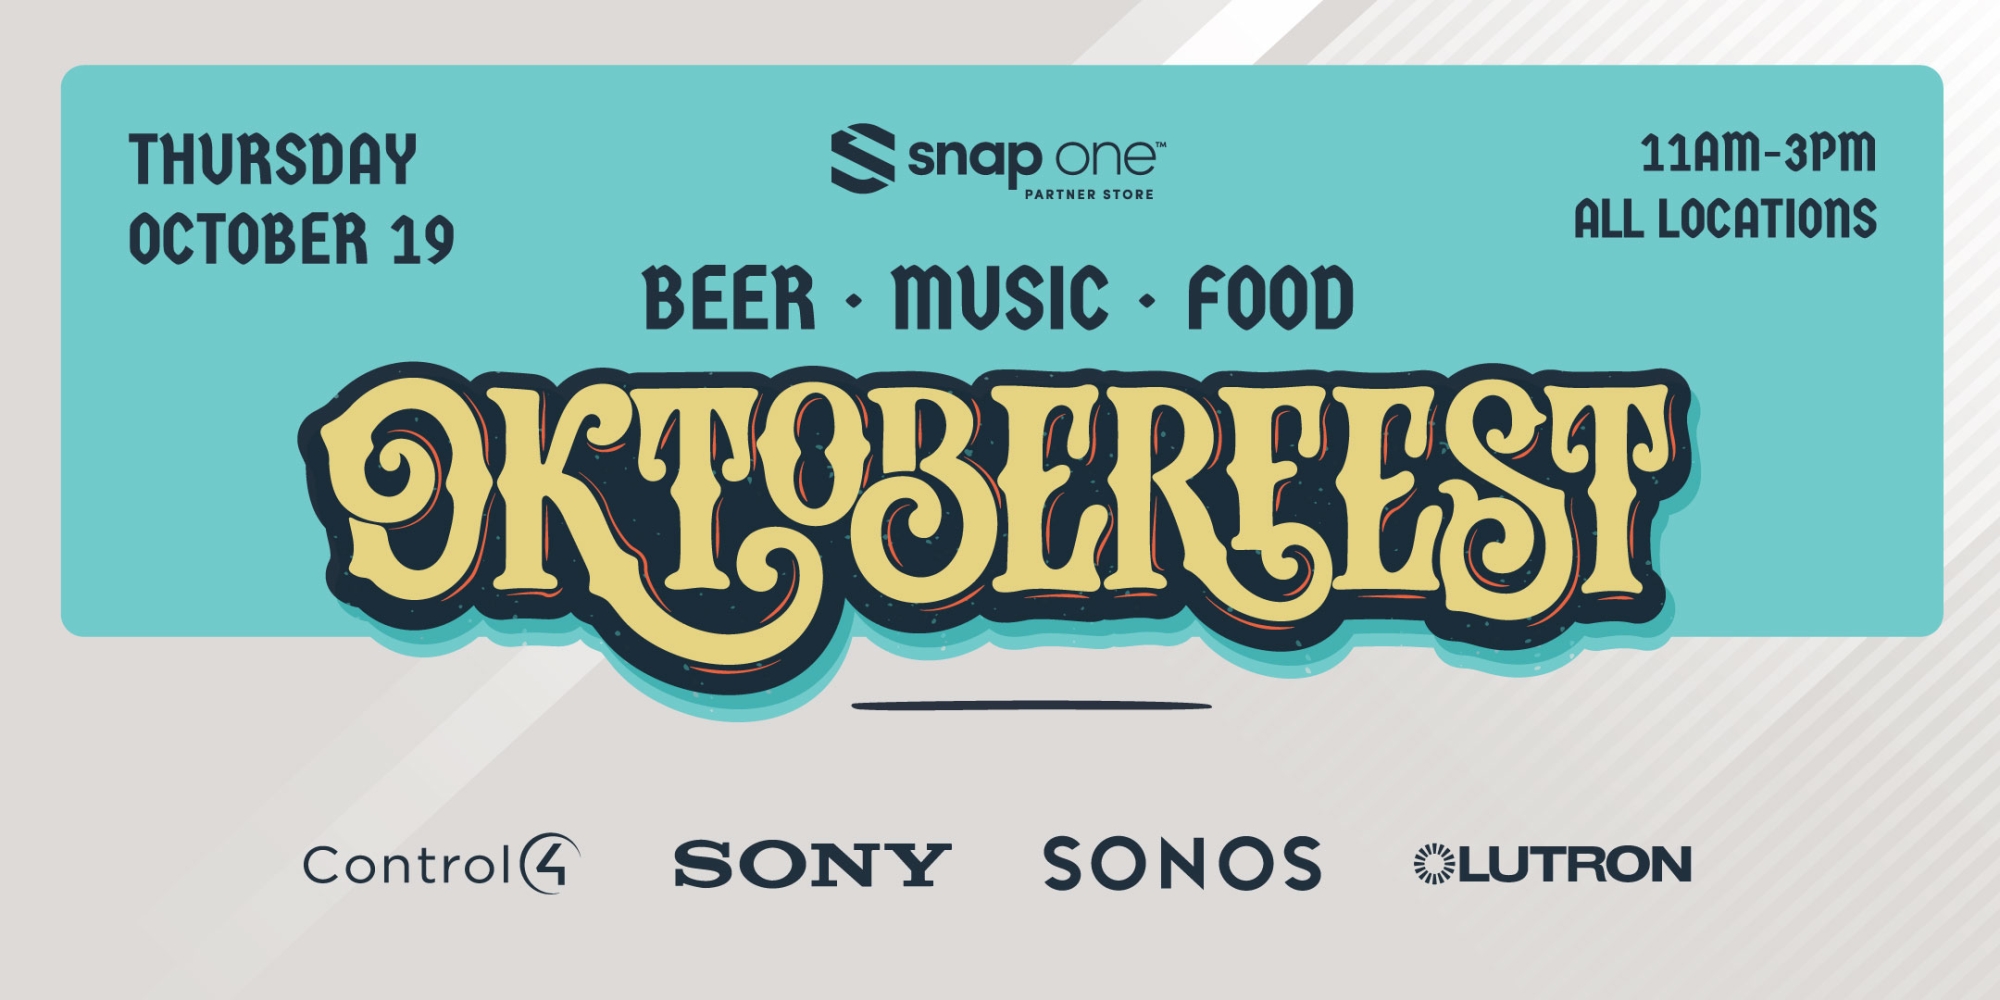 Snap One to Host Oktoberfest Events